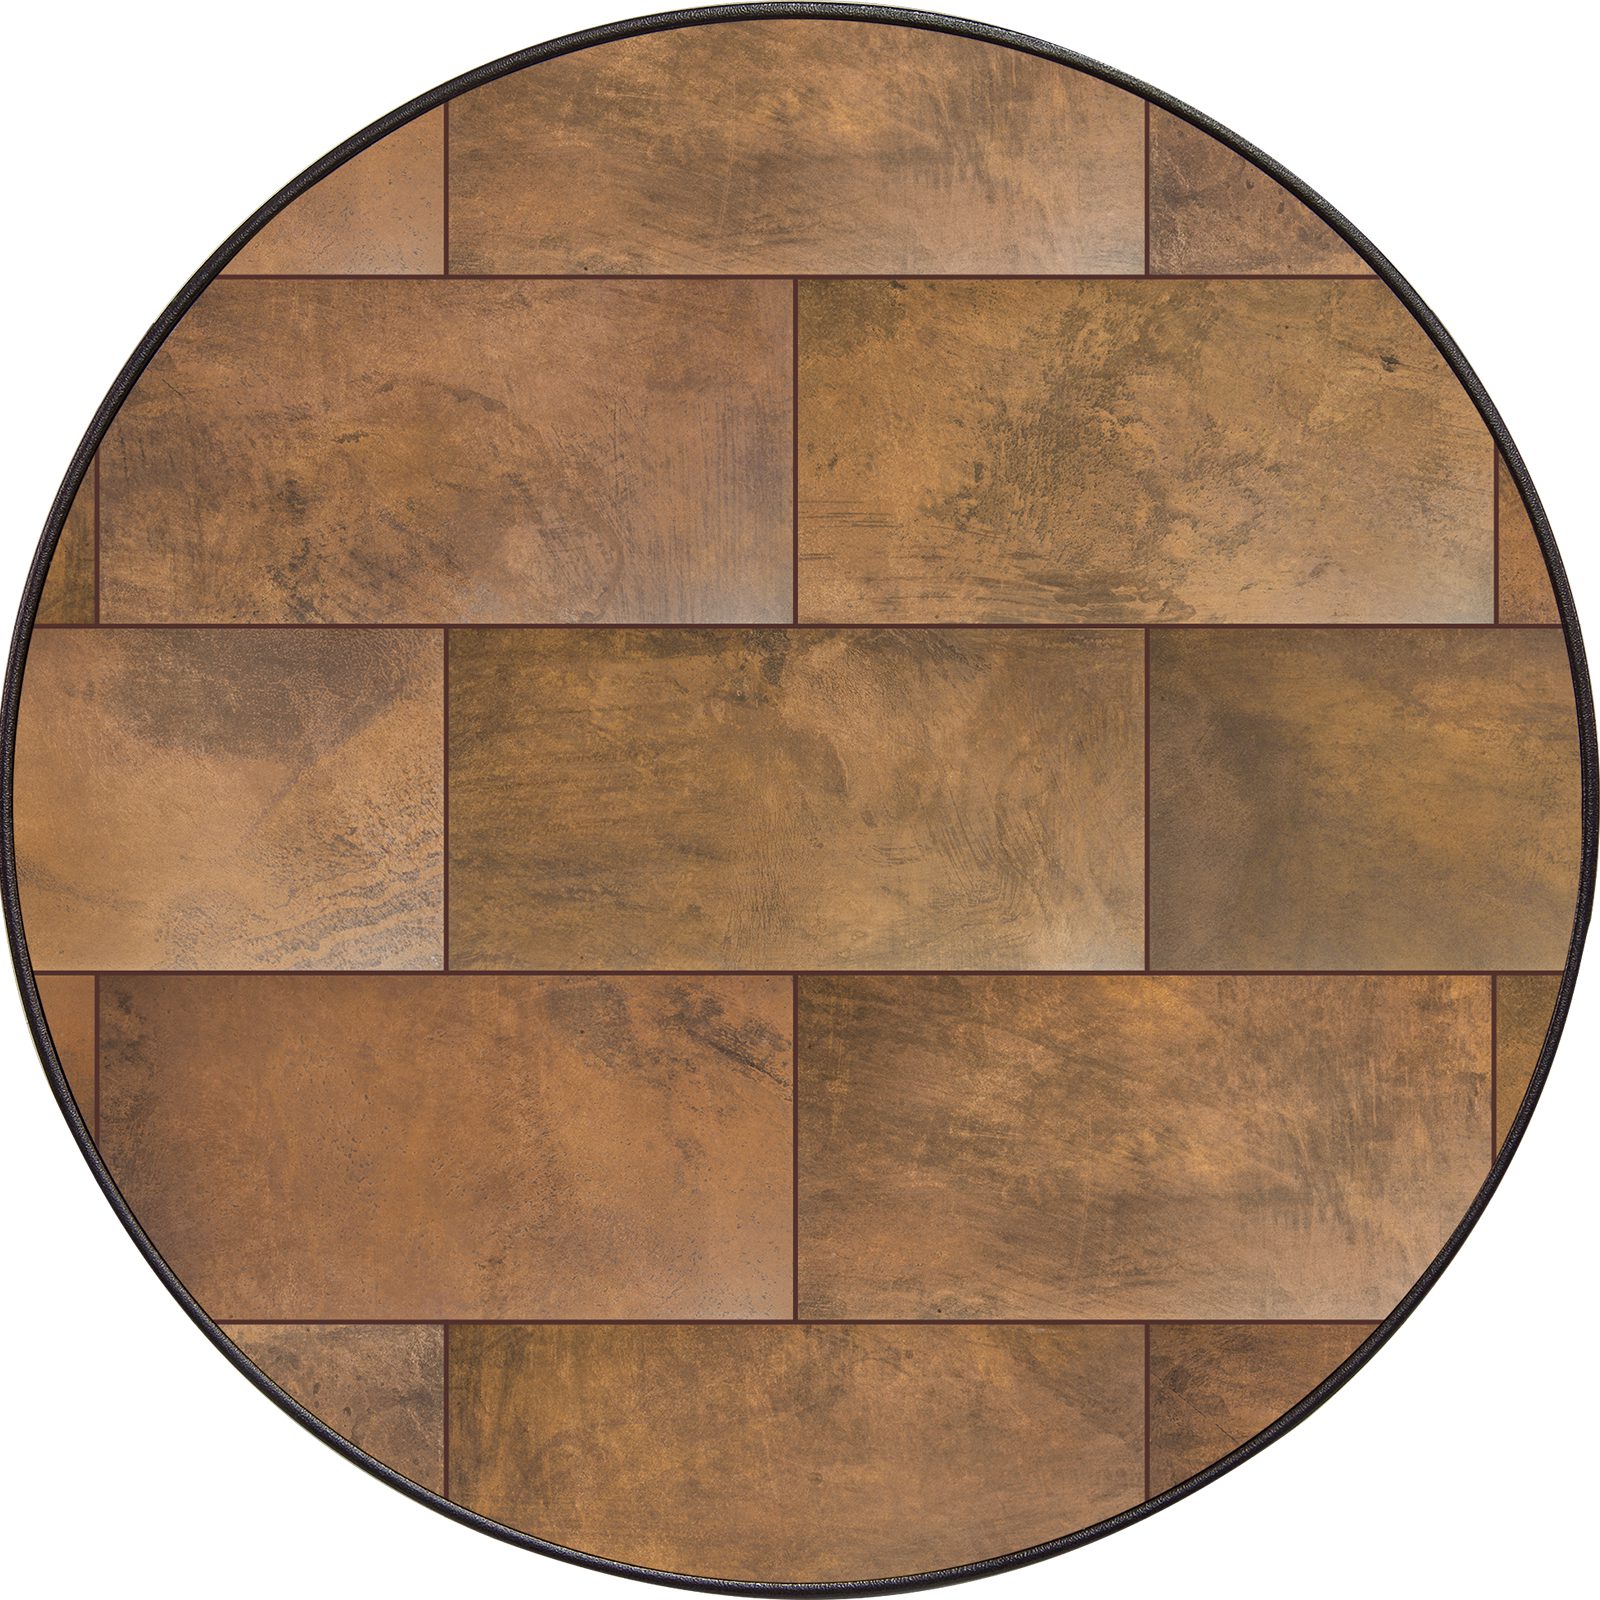 54" Round City Top - Porcelain Table Tops - City Series 8